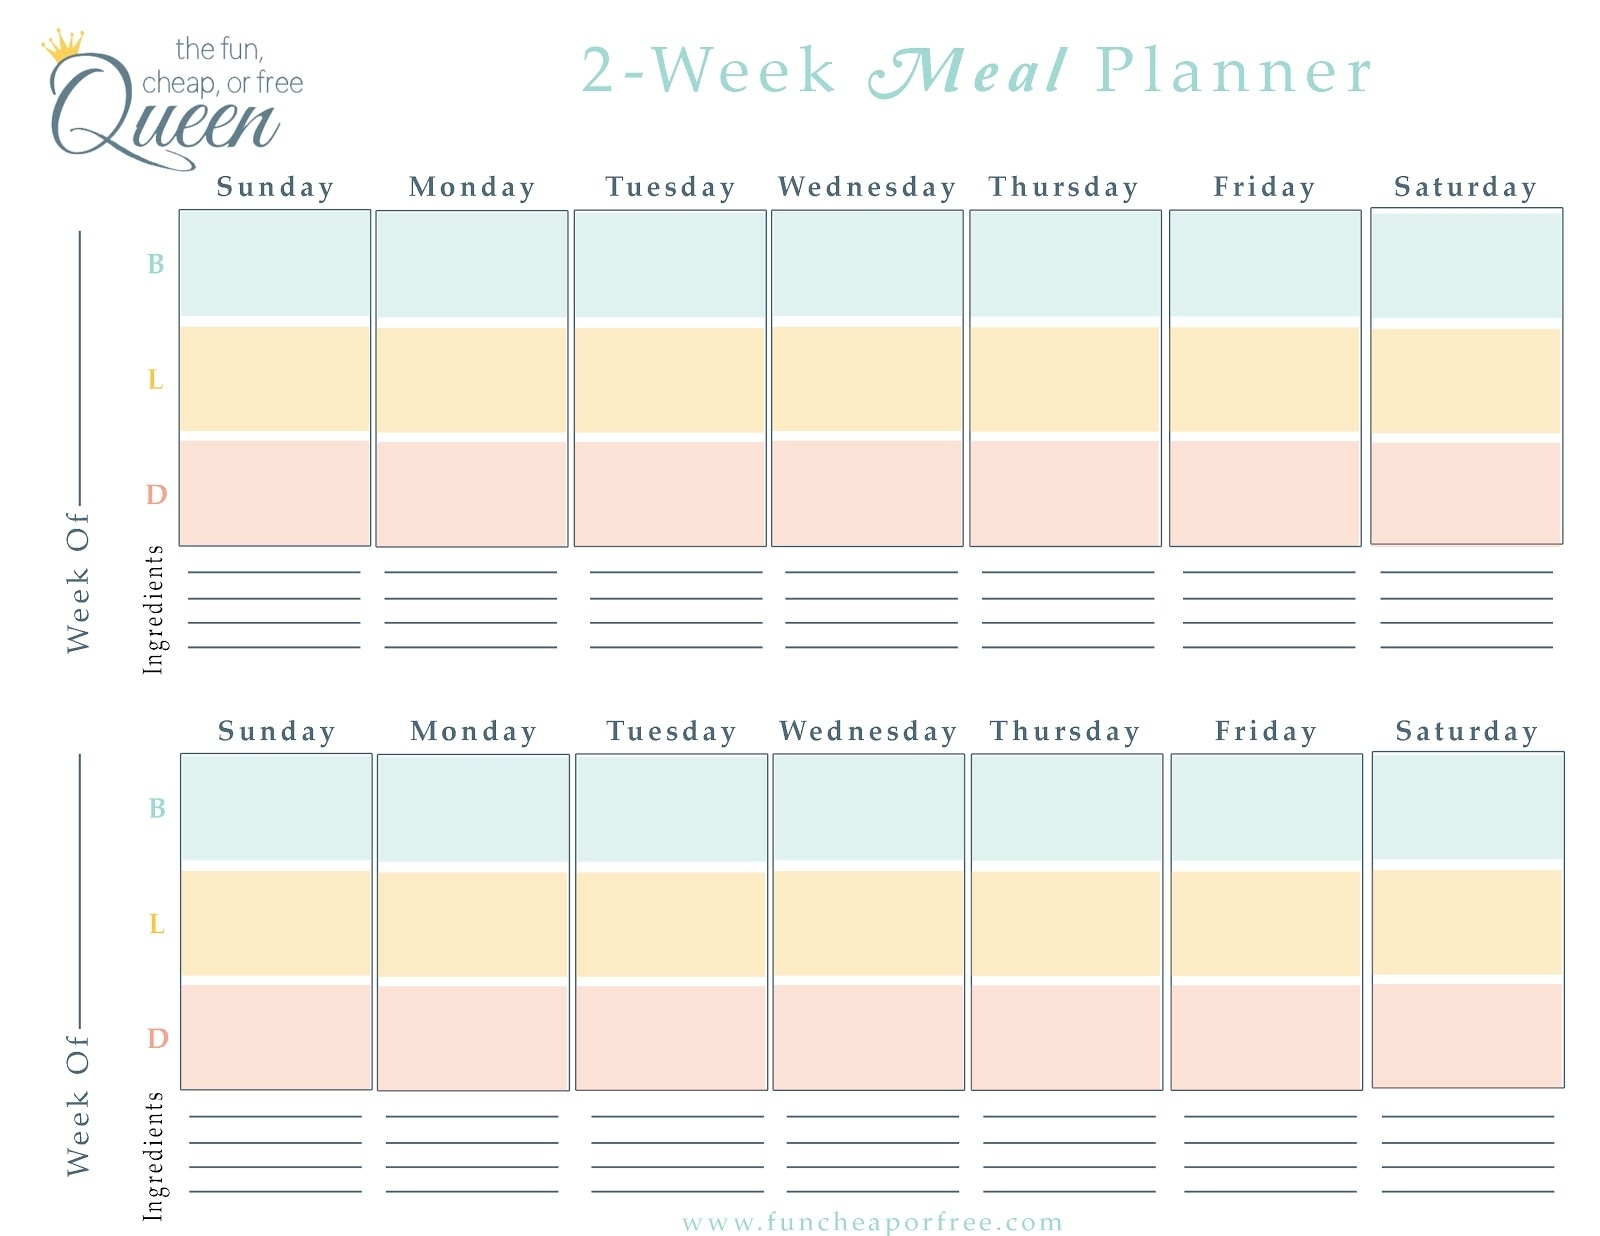 Easy Meal Plan Structure With Free Printables! - Fun Cheap Or Free in 5 Week Lunch Menu Rotation Template